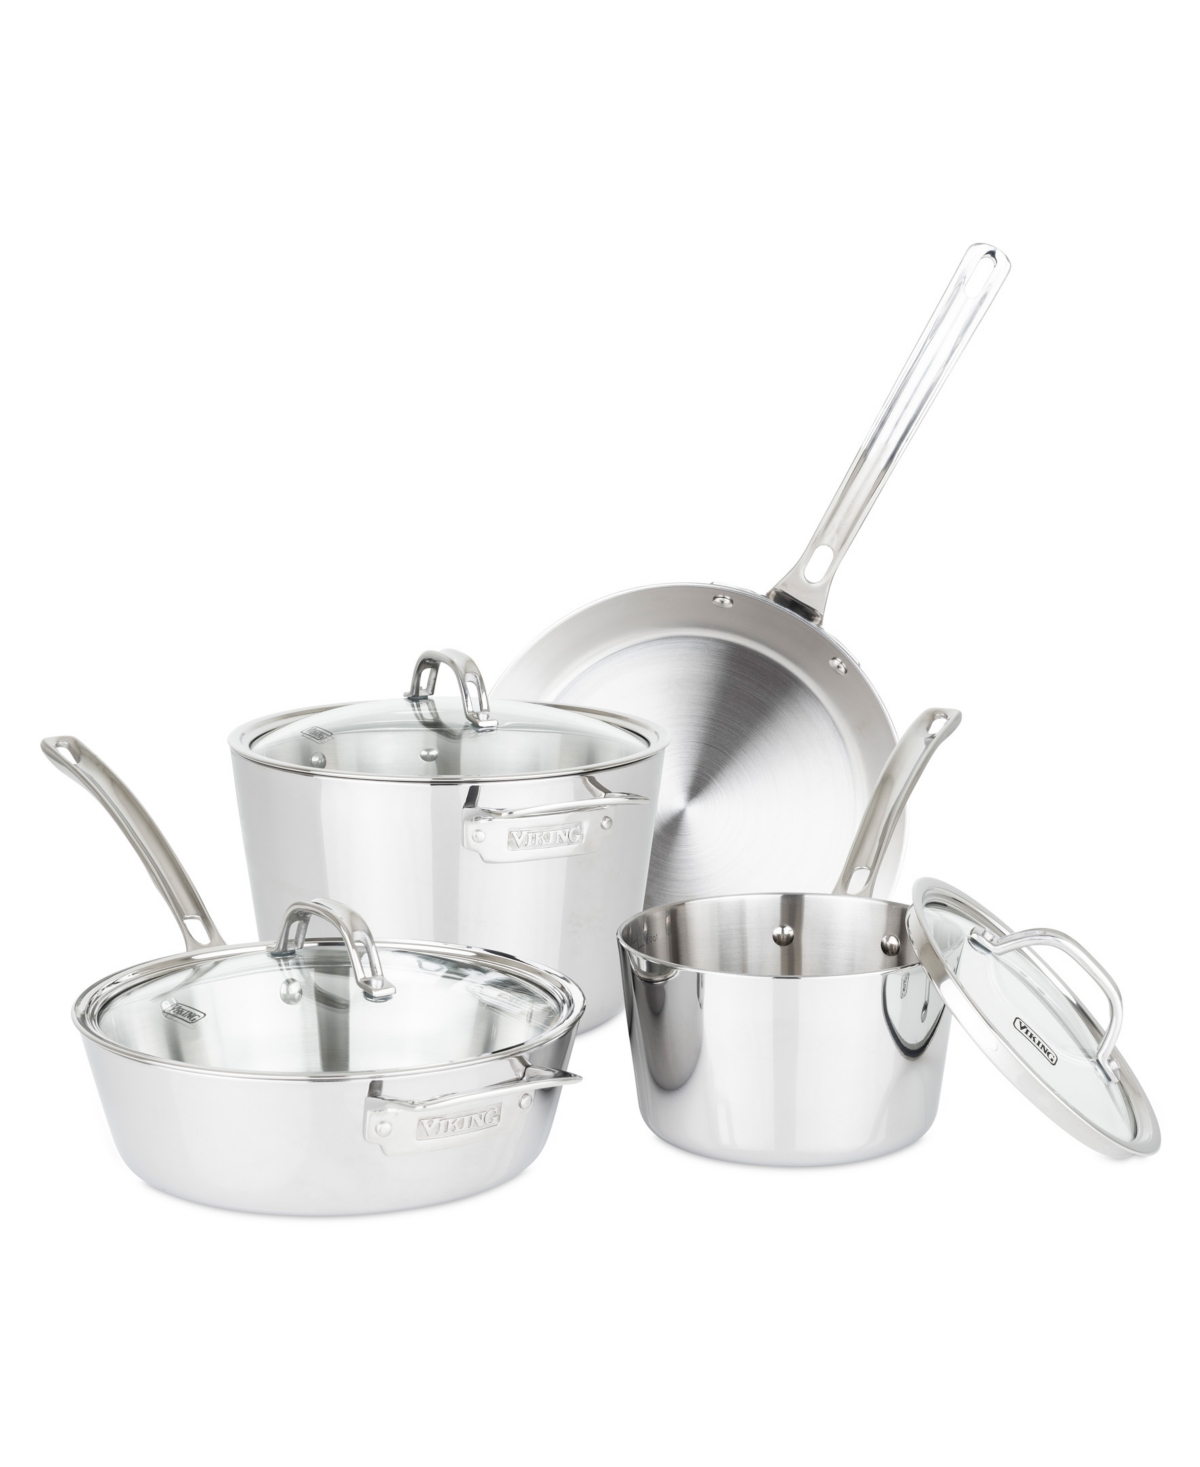 Viking Contemporary Stainless Steel 7-piece Cookware Set